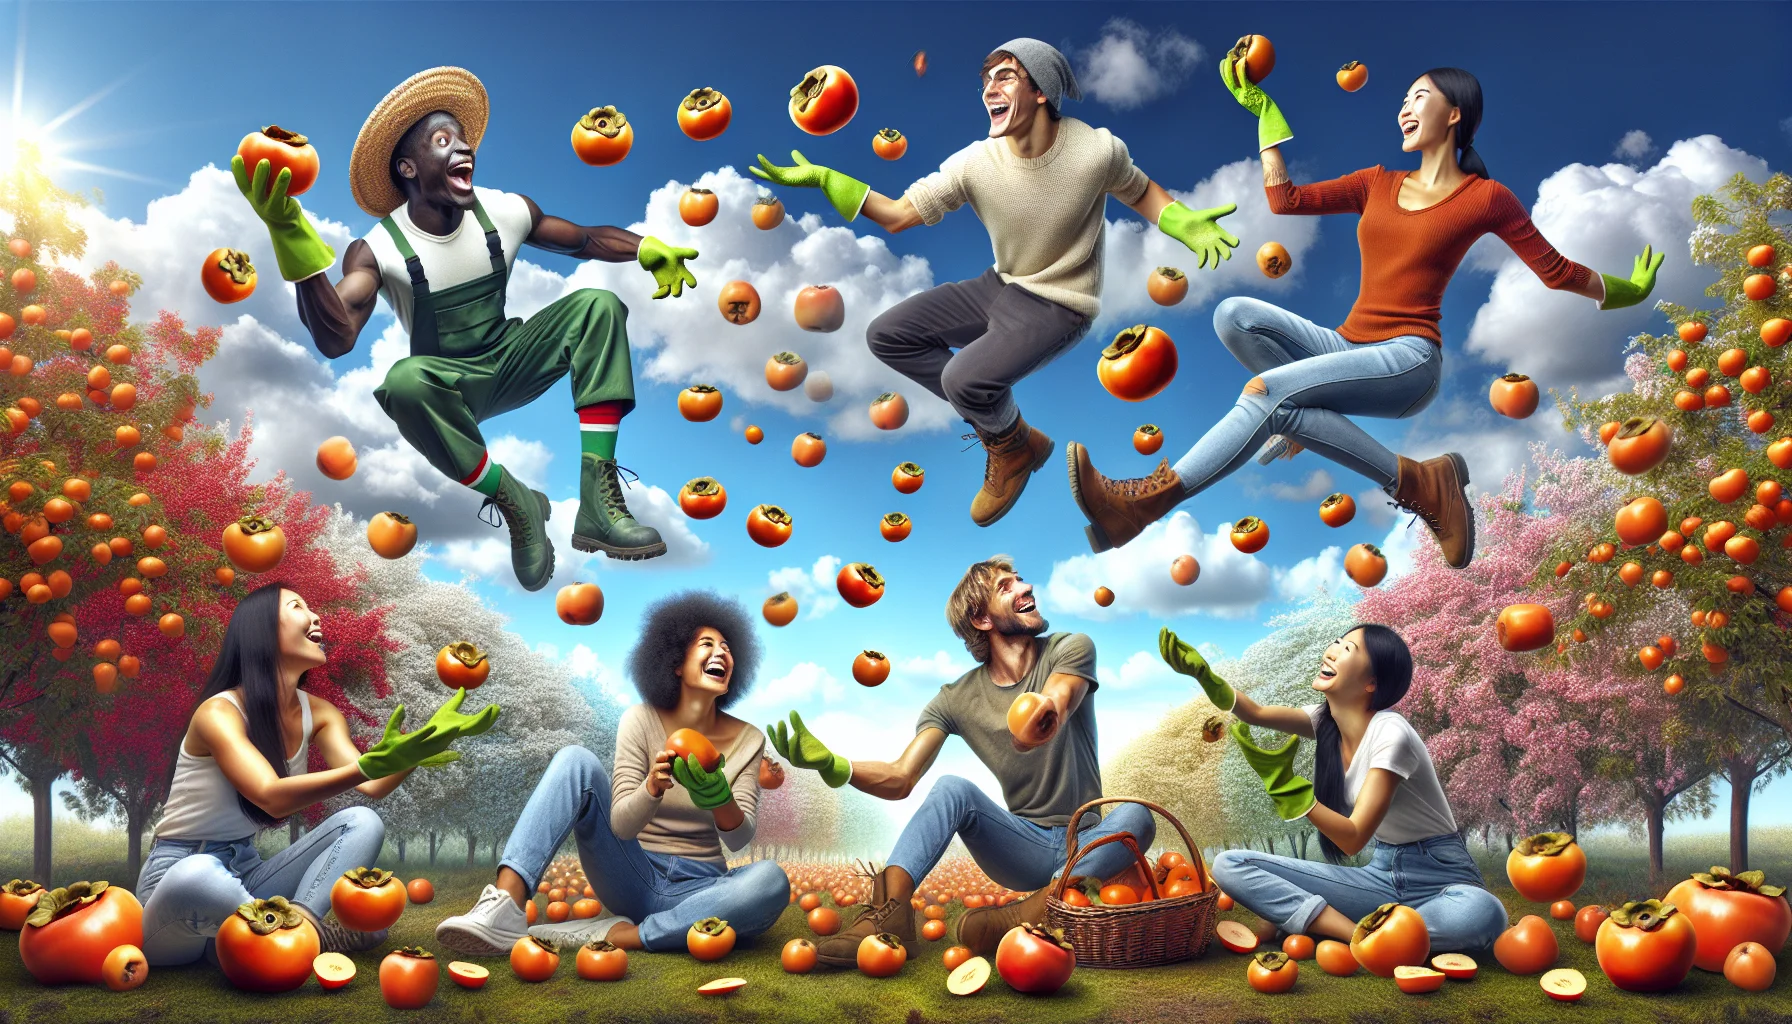 An amusing and captivating image showing a group of people involved in gardening. Have one African male and one Caucasian female, both wearing green gardening gloves, tossing ripe persimmons to each other while balancing on one foot. Include a Hispanic male and an Asian female sitting on the grass, laughing and peeling persimmons. Show the sky as azure blue, filled with fluffy white clouds, and a background filled with a multitude of blooming flowers in various colors, creating a cheerful and light-hearted atmosphere. The intent is to portray gardening and enjoying persimmons in a fun and enticing way.